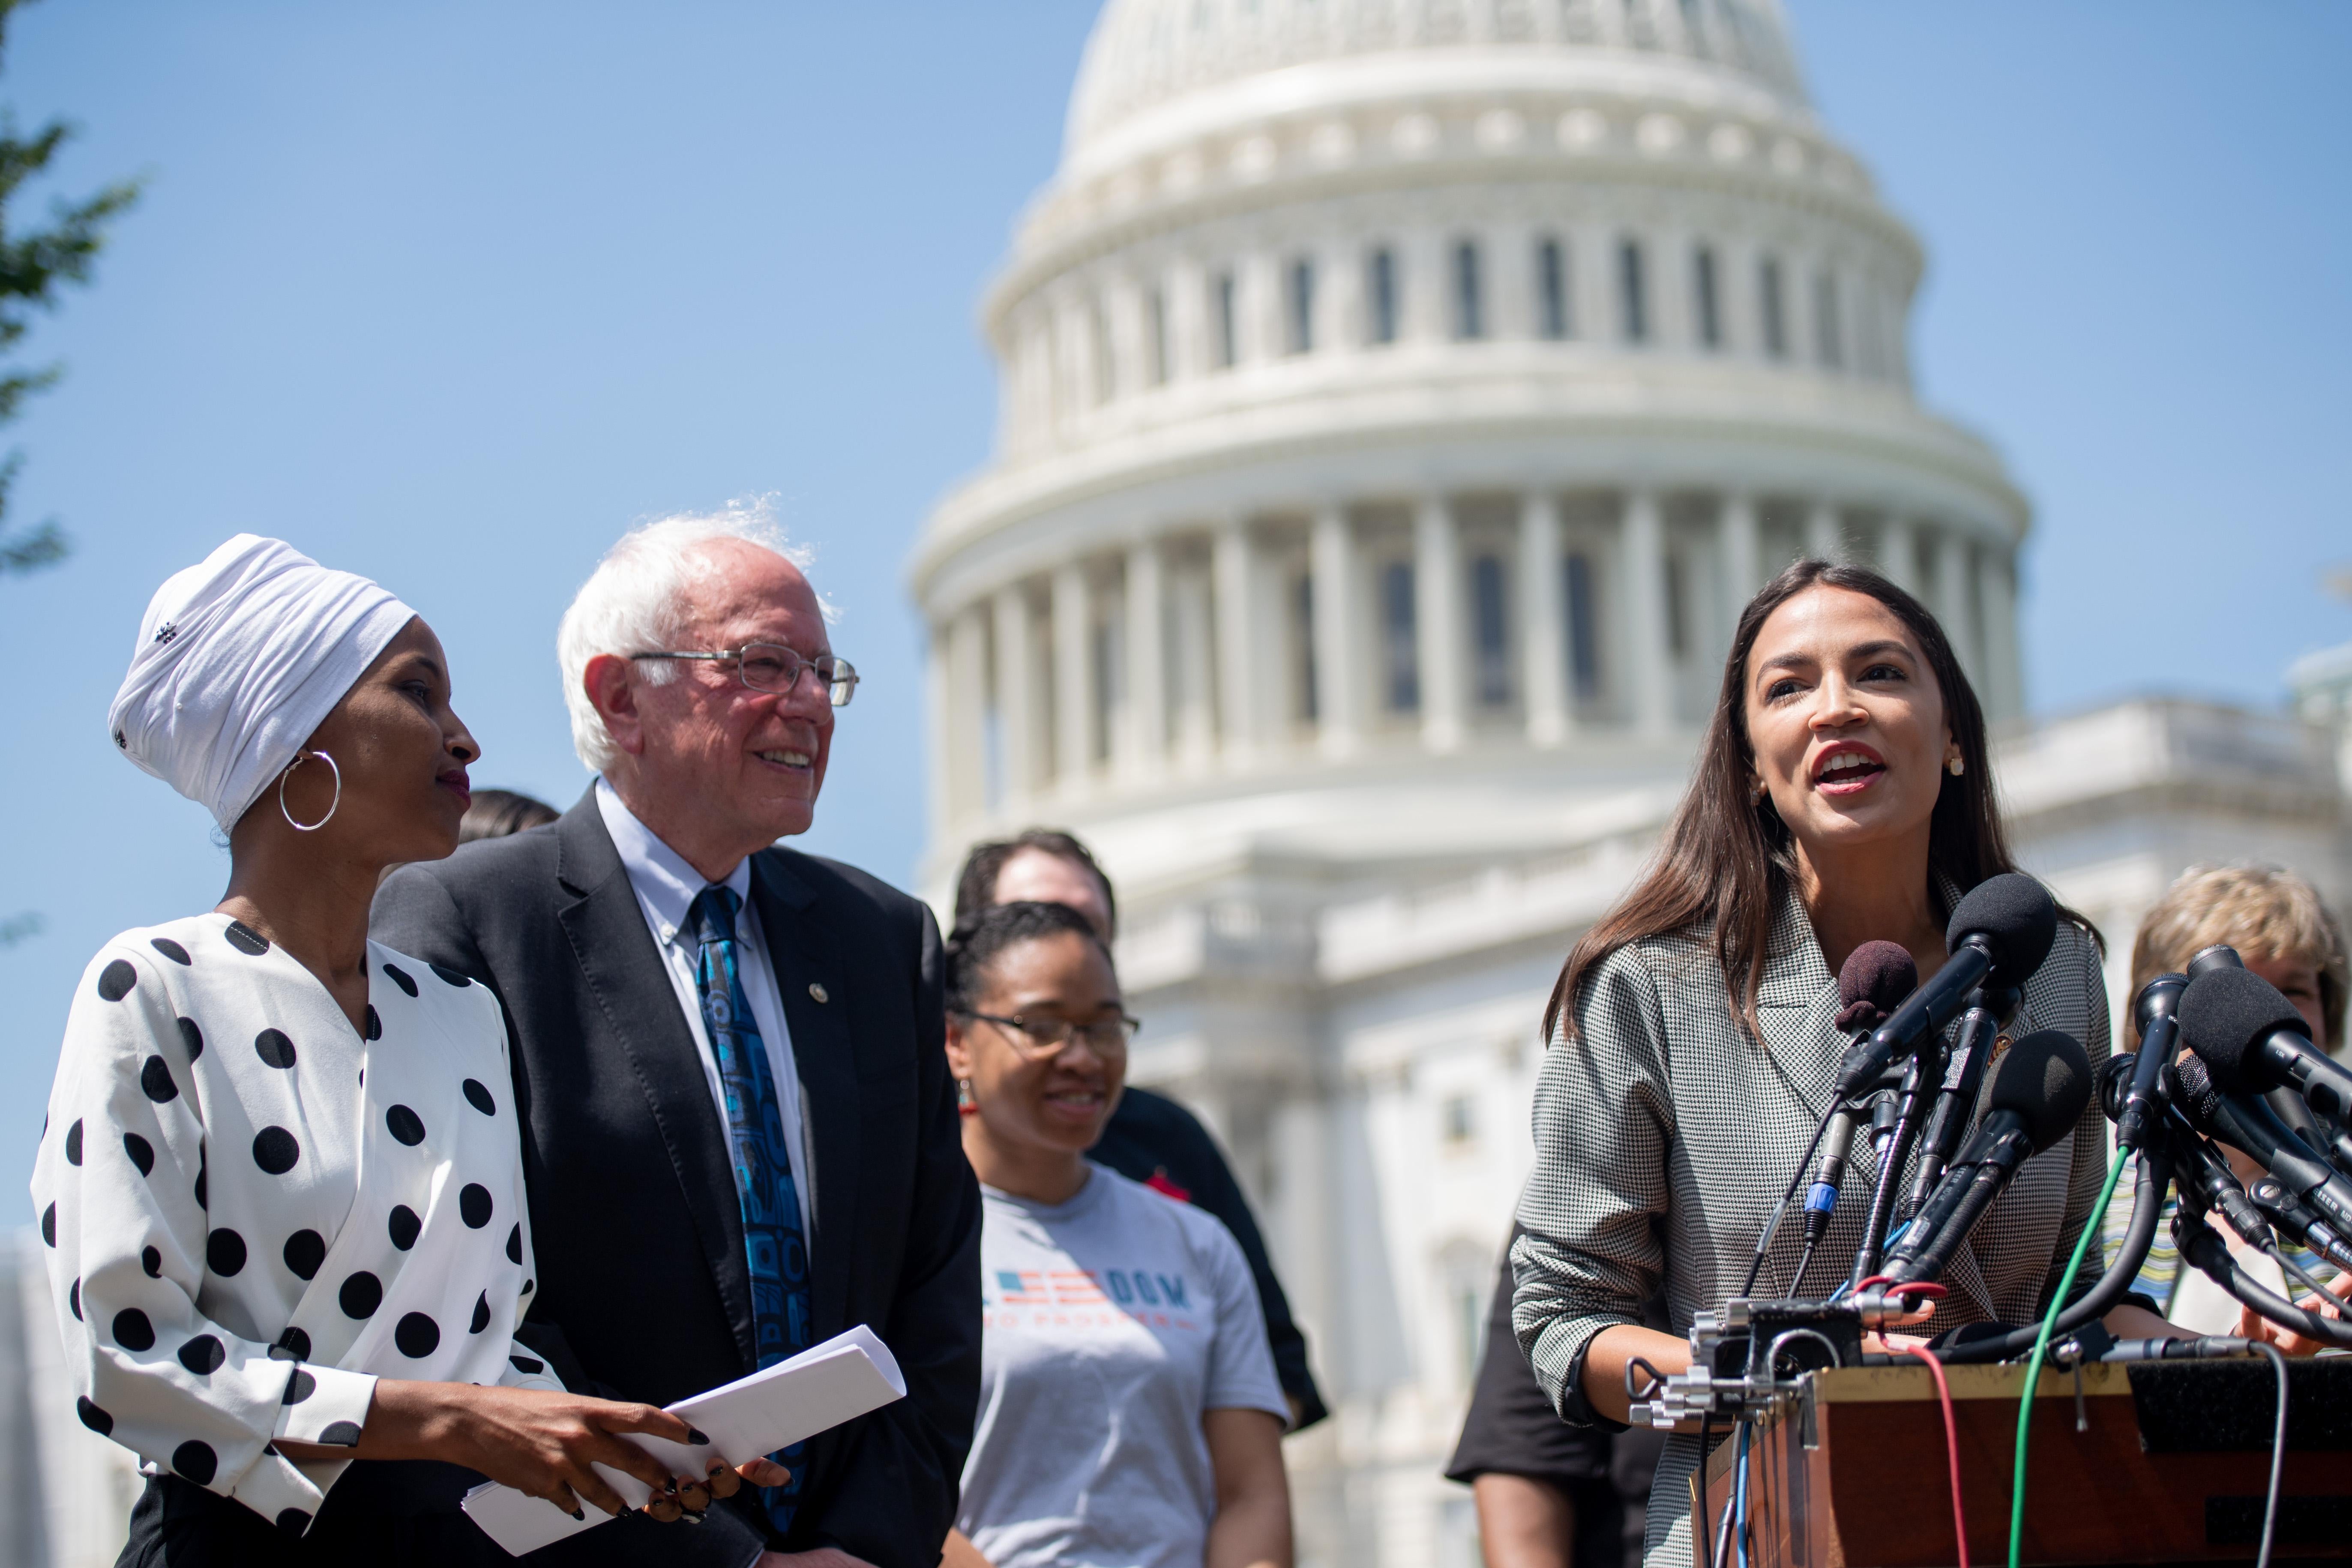 Ilhan Omar and Bernie Sanders look on as Alexandria Ocasio-Cortez speaks into several microphones at a podium. The Capitol dome and several other people are behind them.